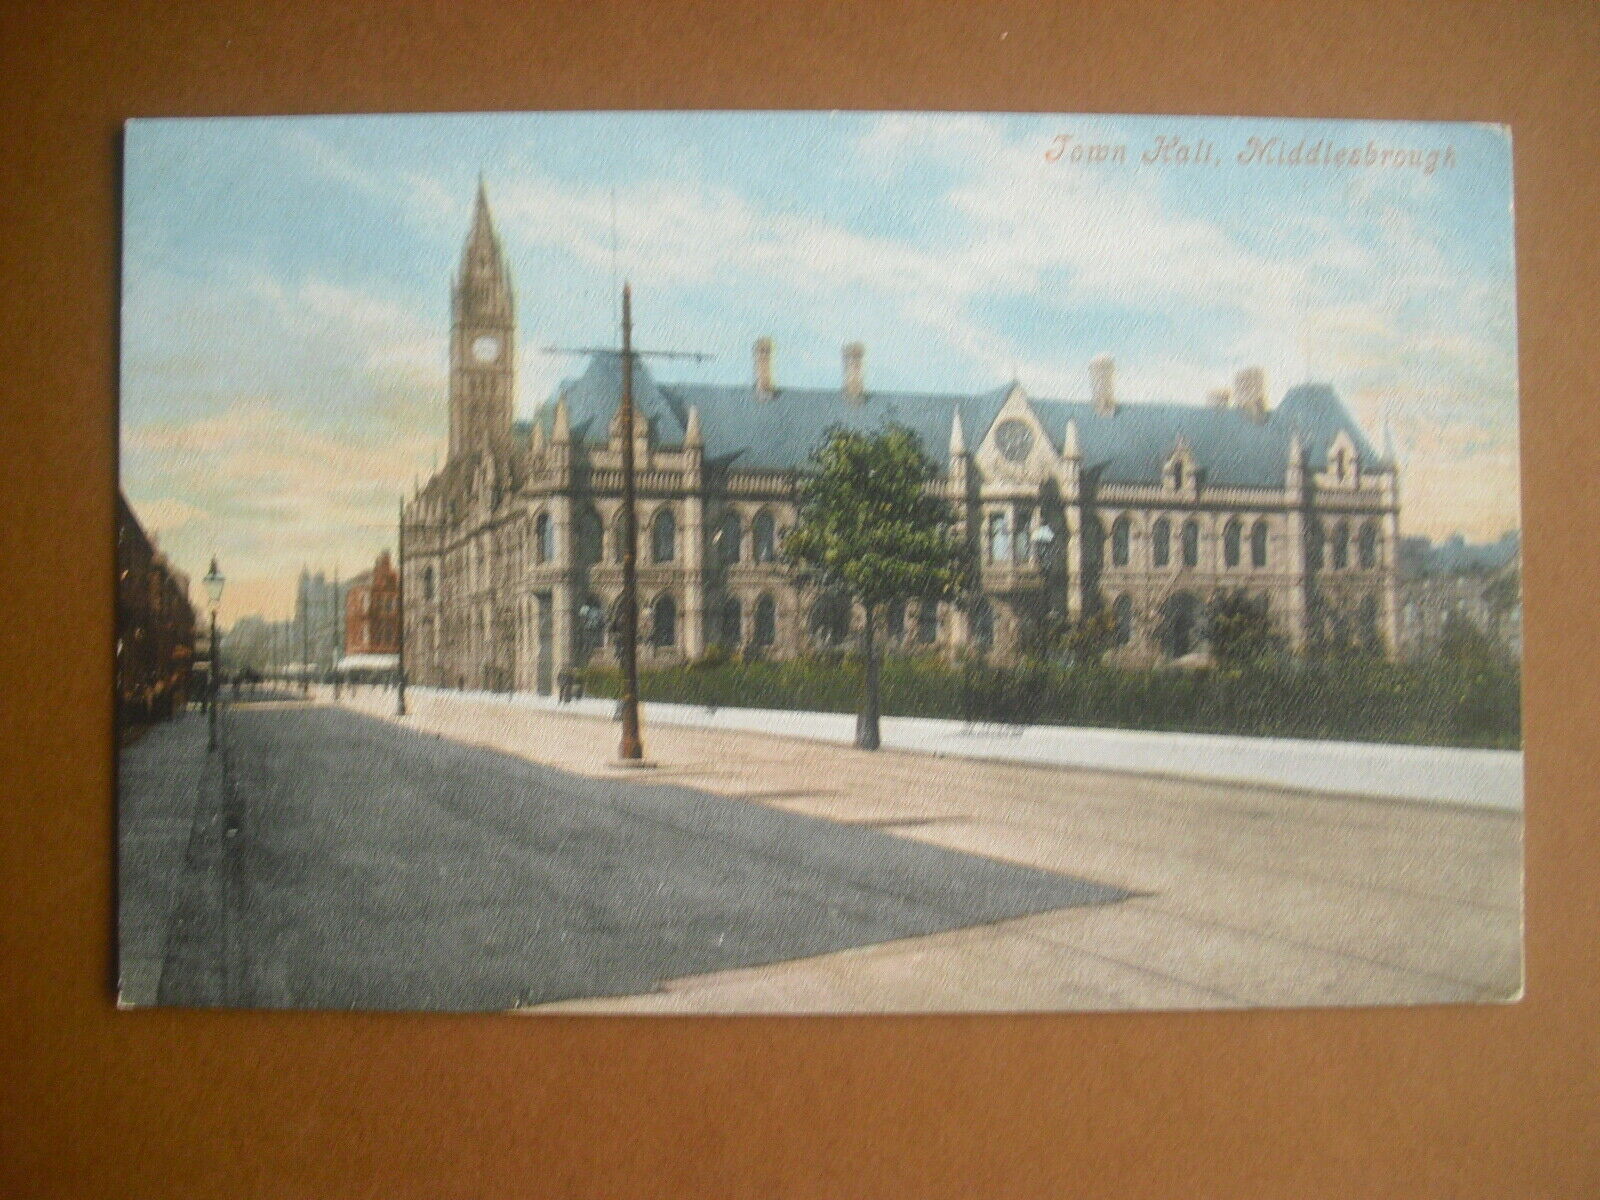 House Clearance - POSTCARD TOWN HALL, MIDDLESBROUGH, YORKSHIRE